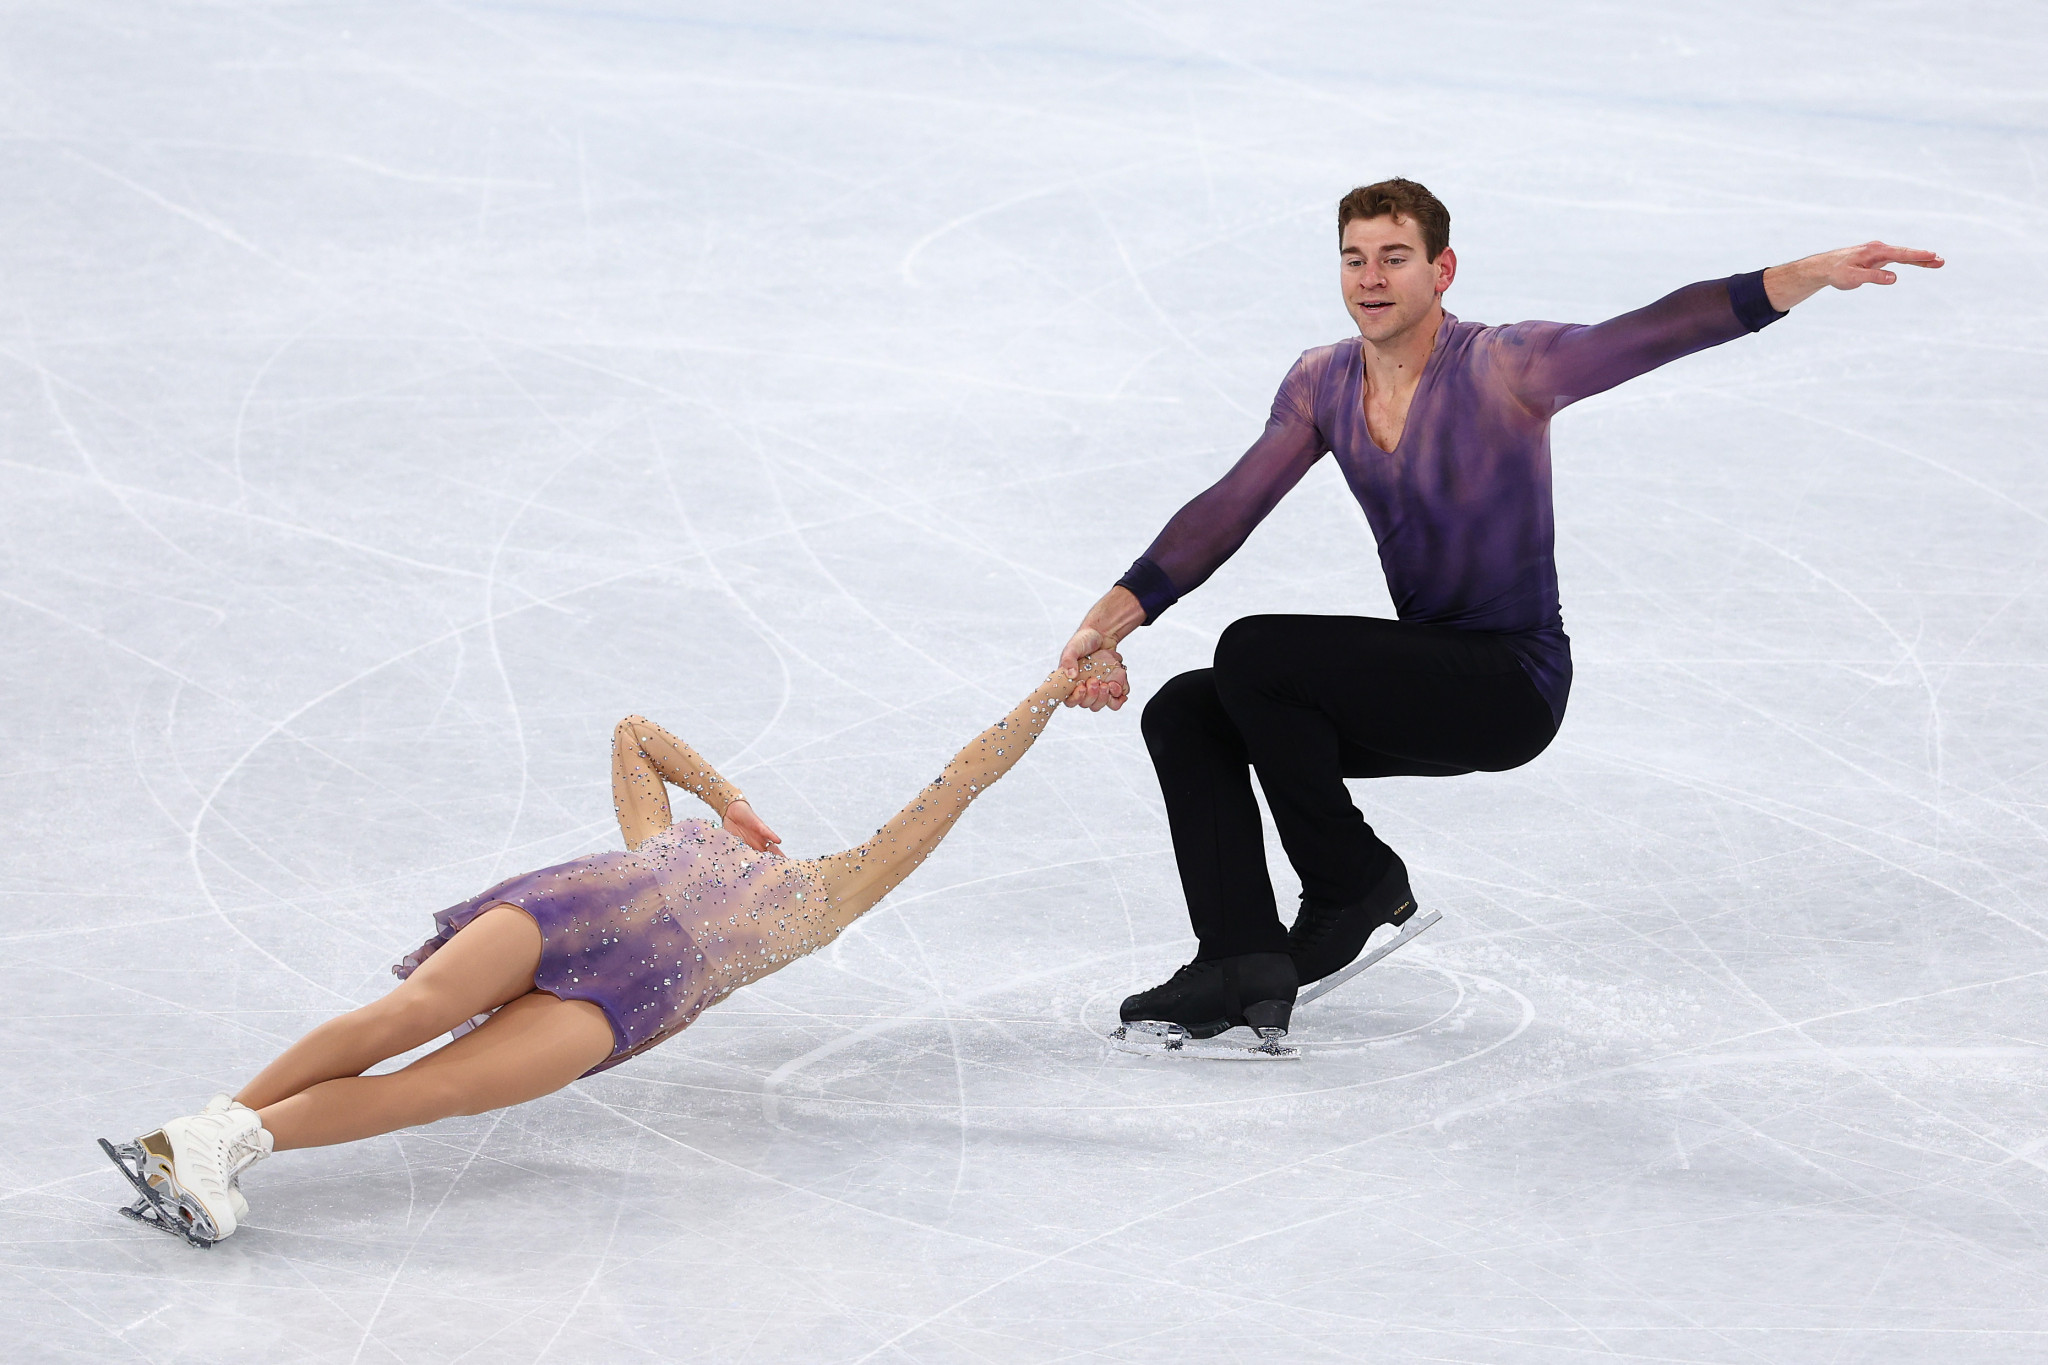 Pairs skaters Alexa Knierim and Brandon Frazier are facing legal action over their choice of music © Getty Images